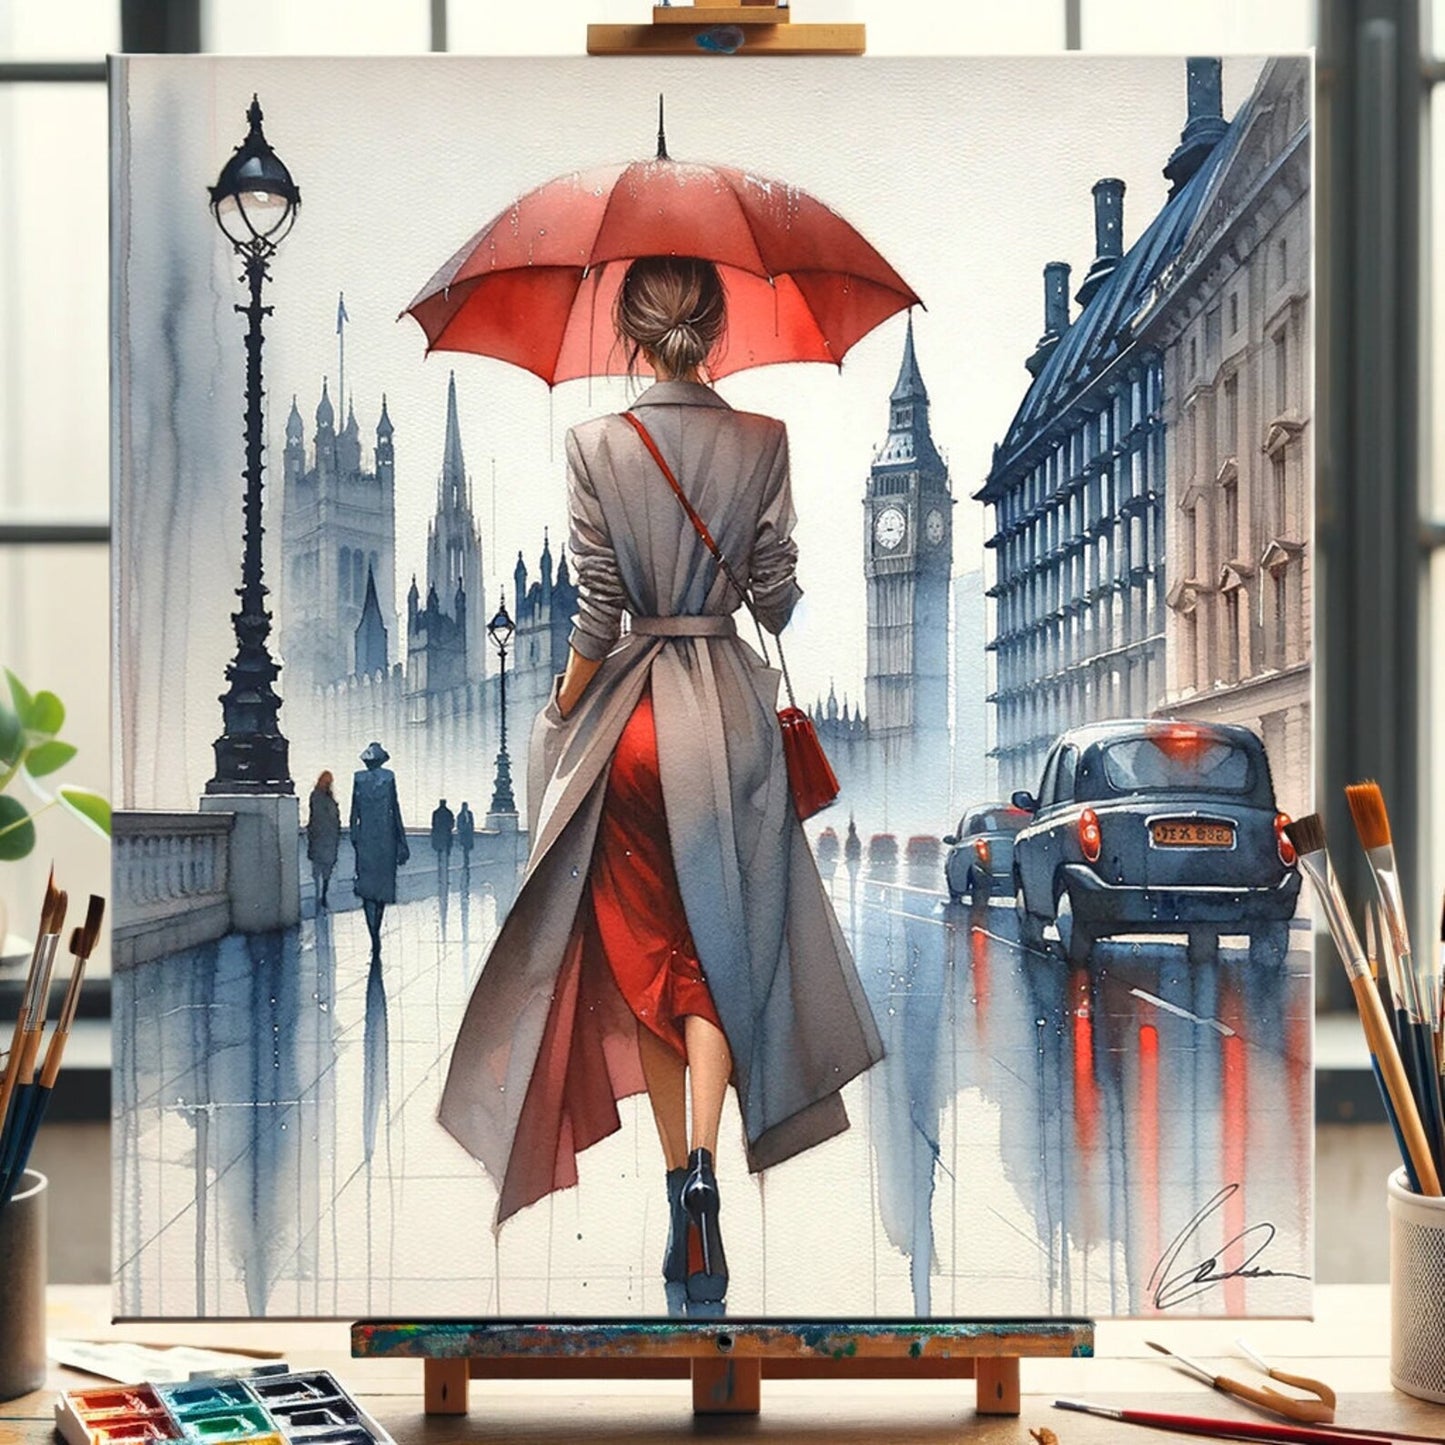 Valentine's Day present ”Solo London Escape“ - Independent Woman - City Life Canvas - Modern Chic Decor - Canvas Wrapped Artwork